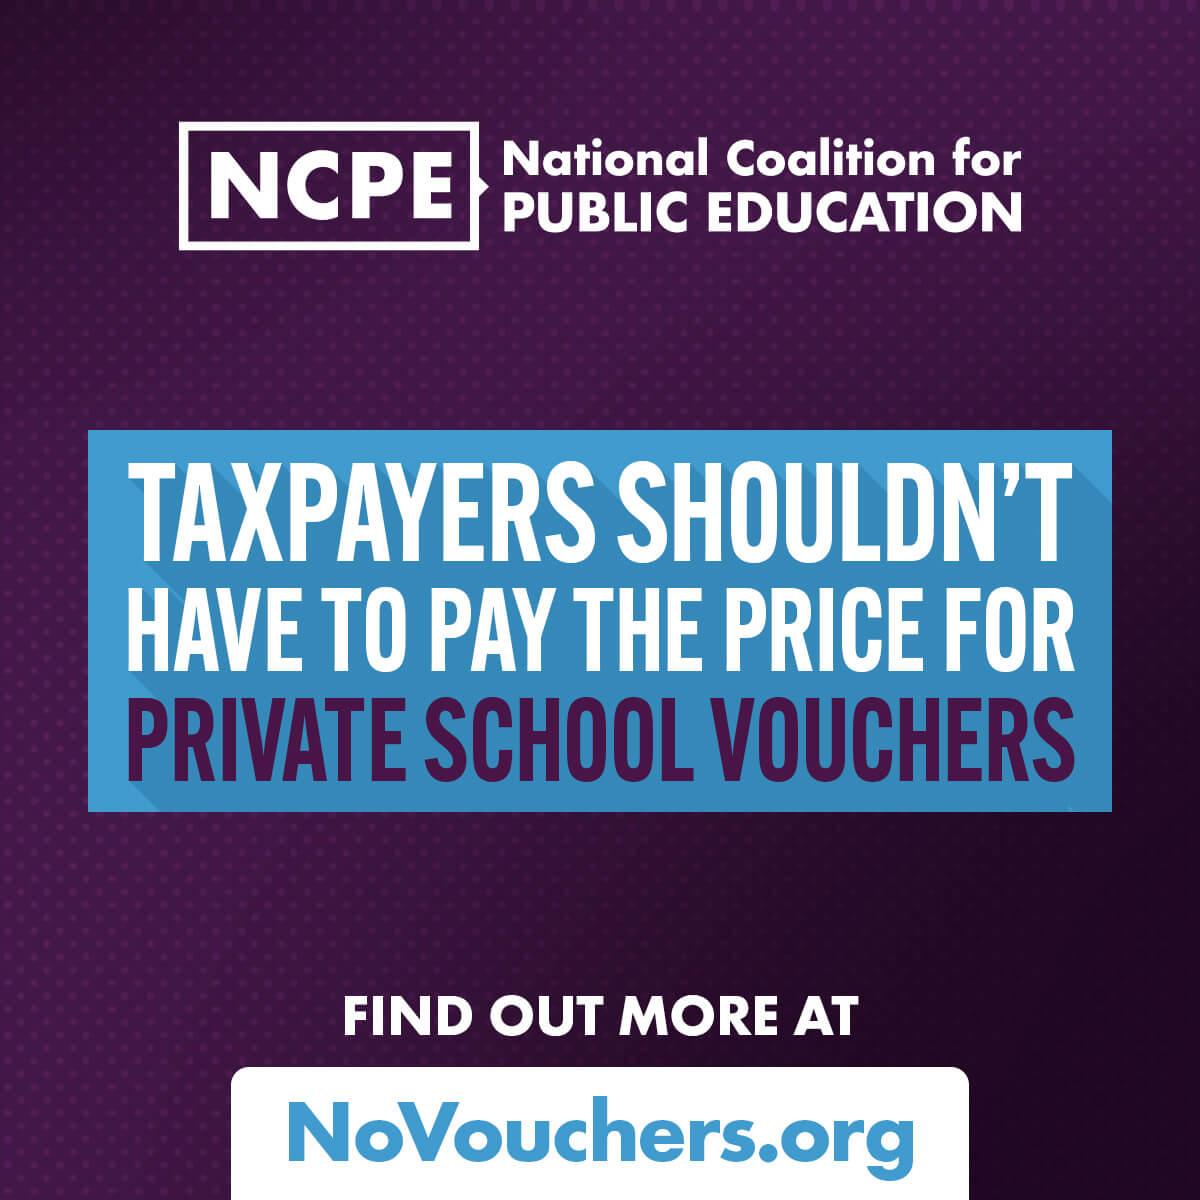 Taxpayers shouldn't have to pay the price for private school vouchers